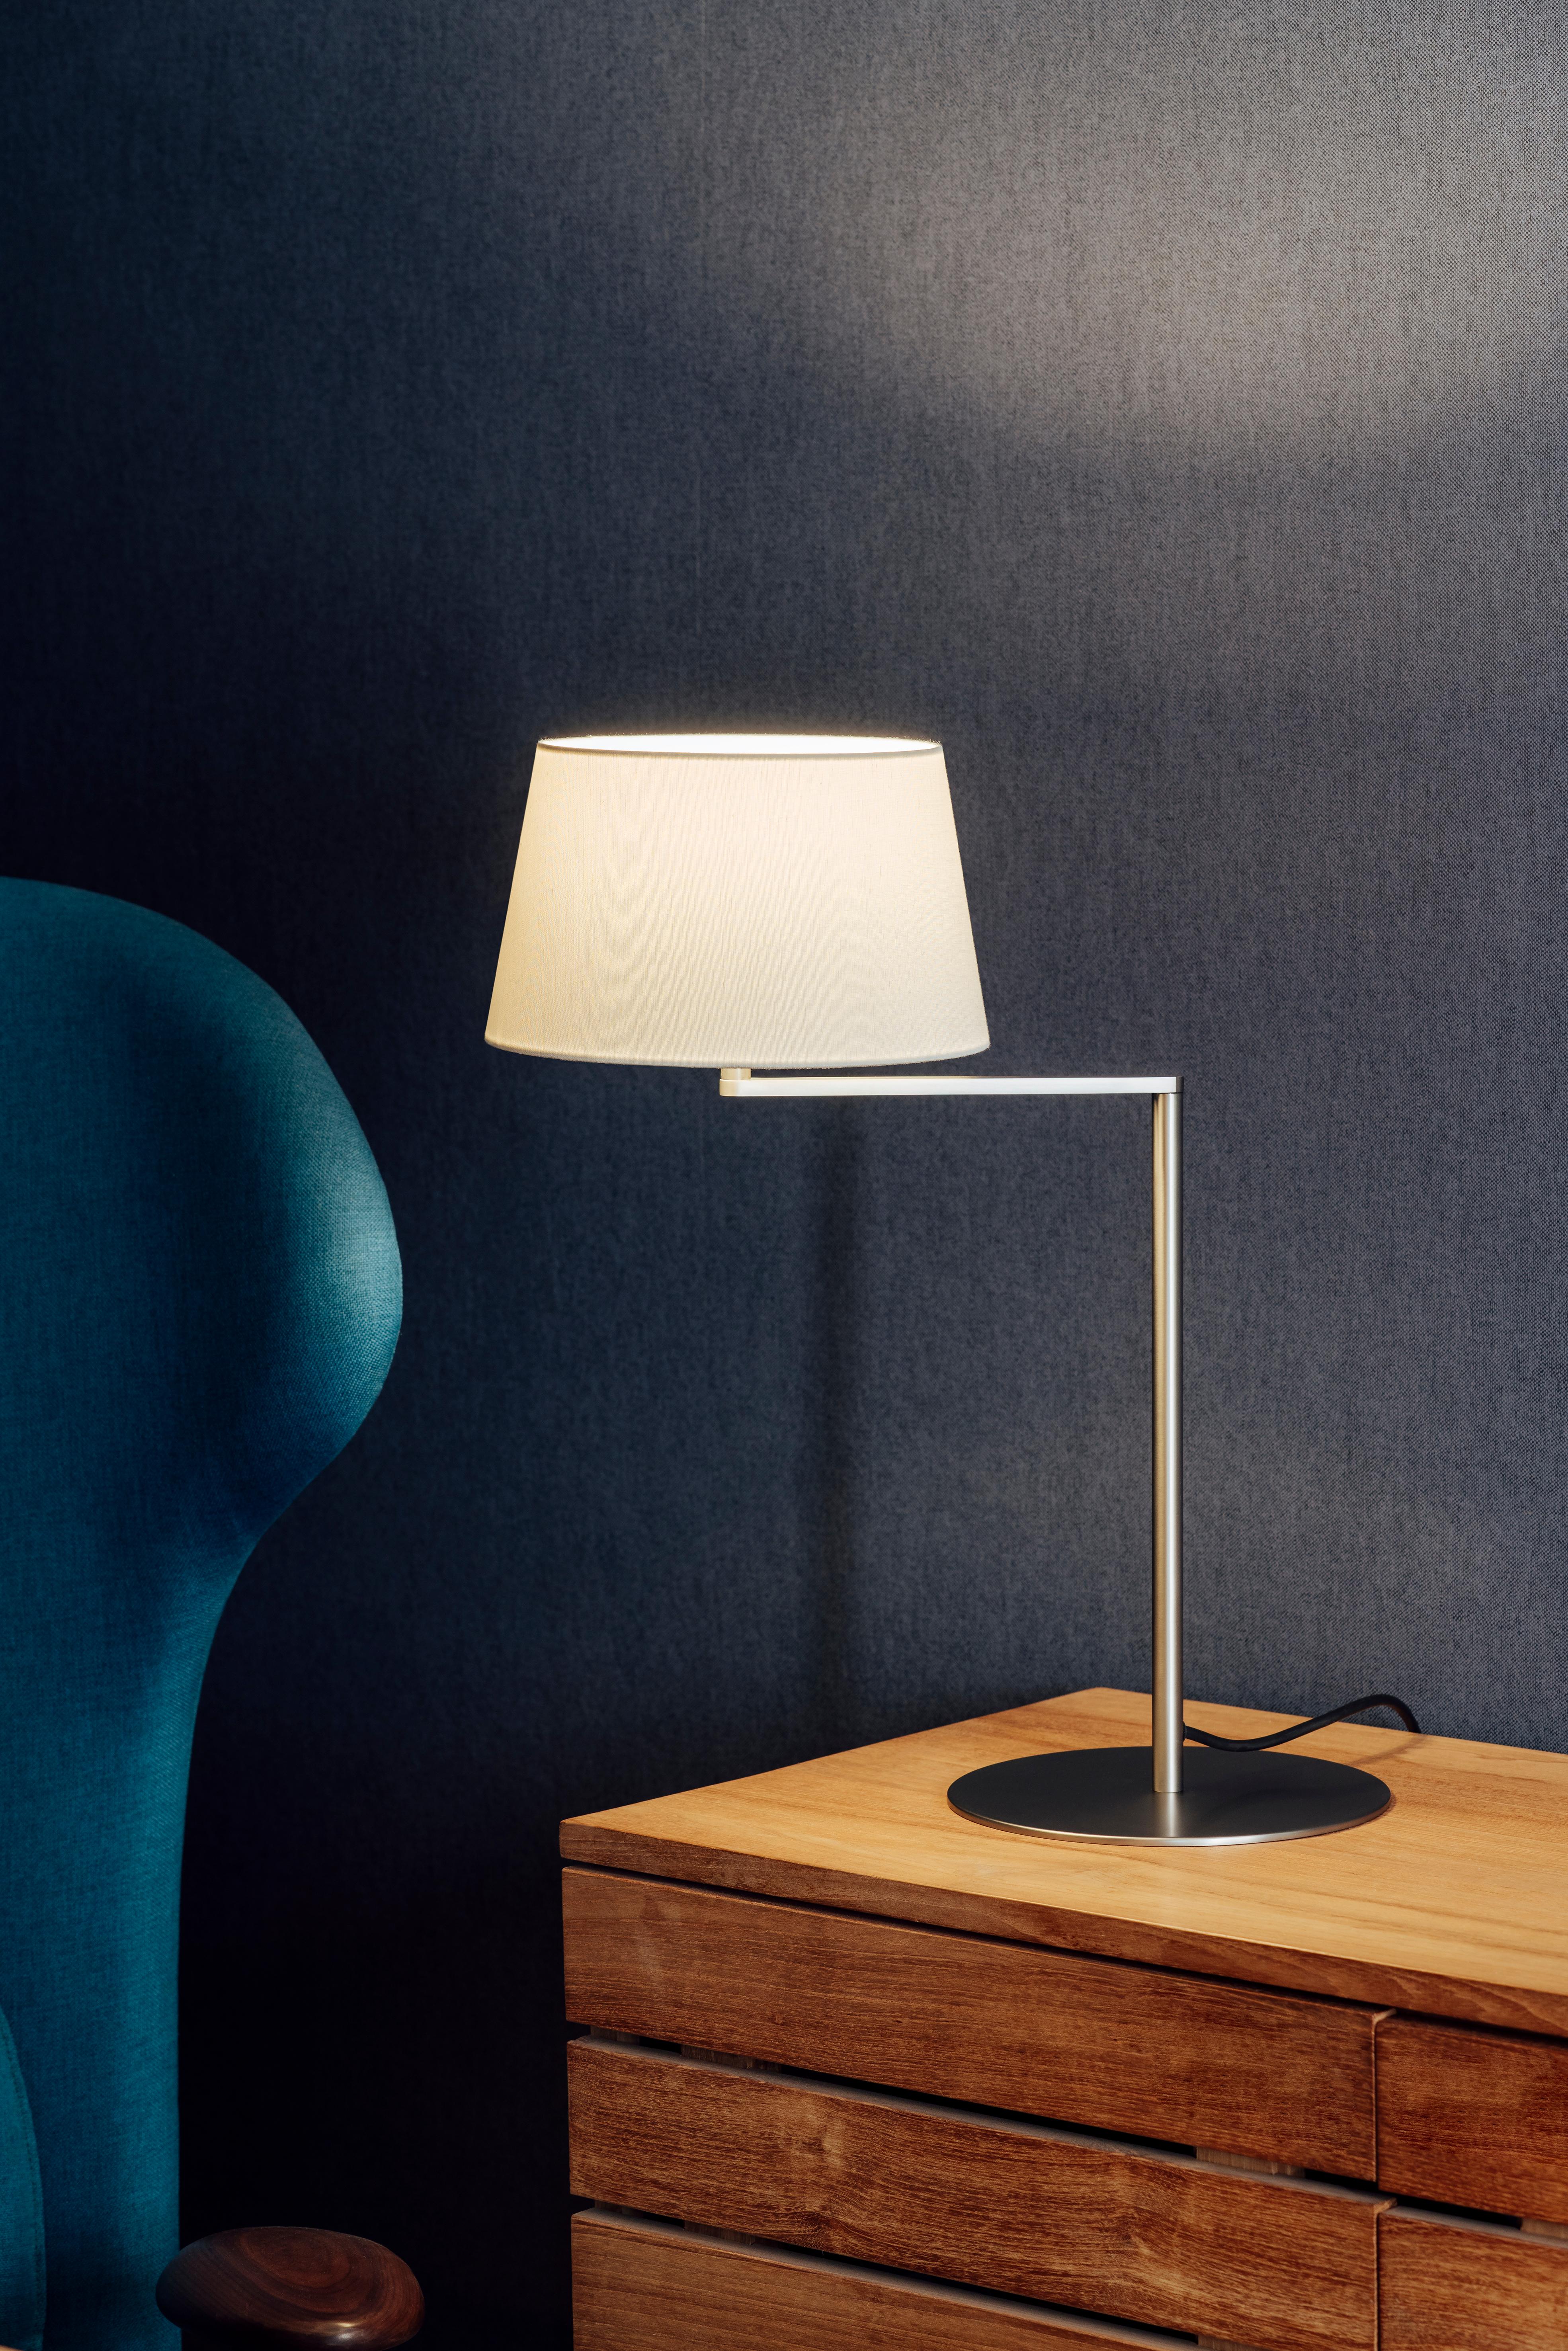 Spanish Americana Table Lamp by Miguel Milá